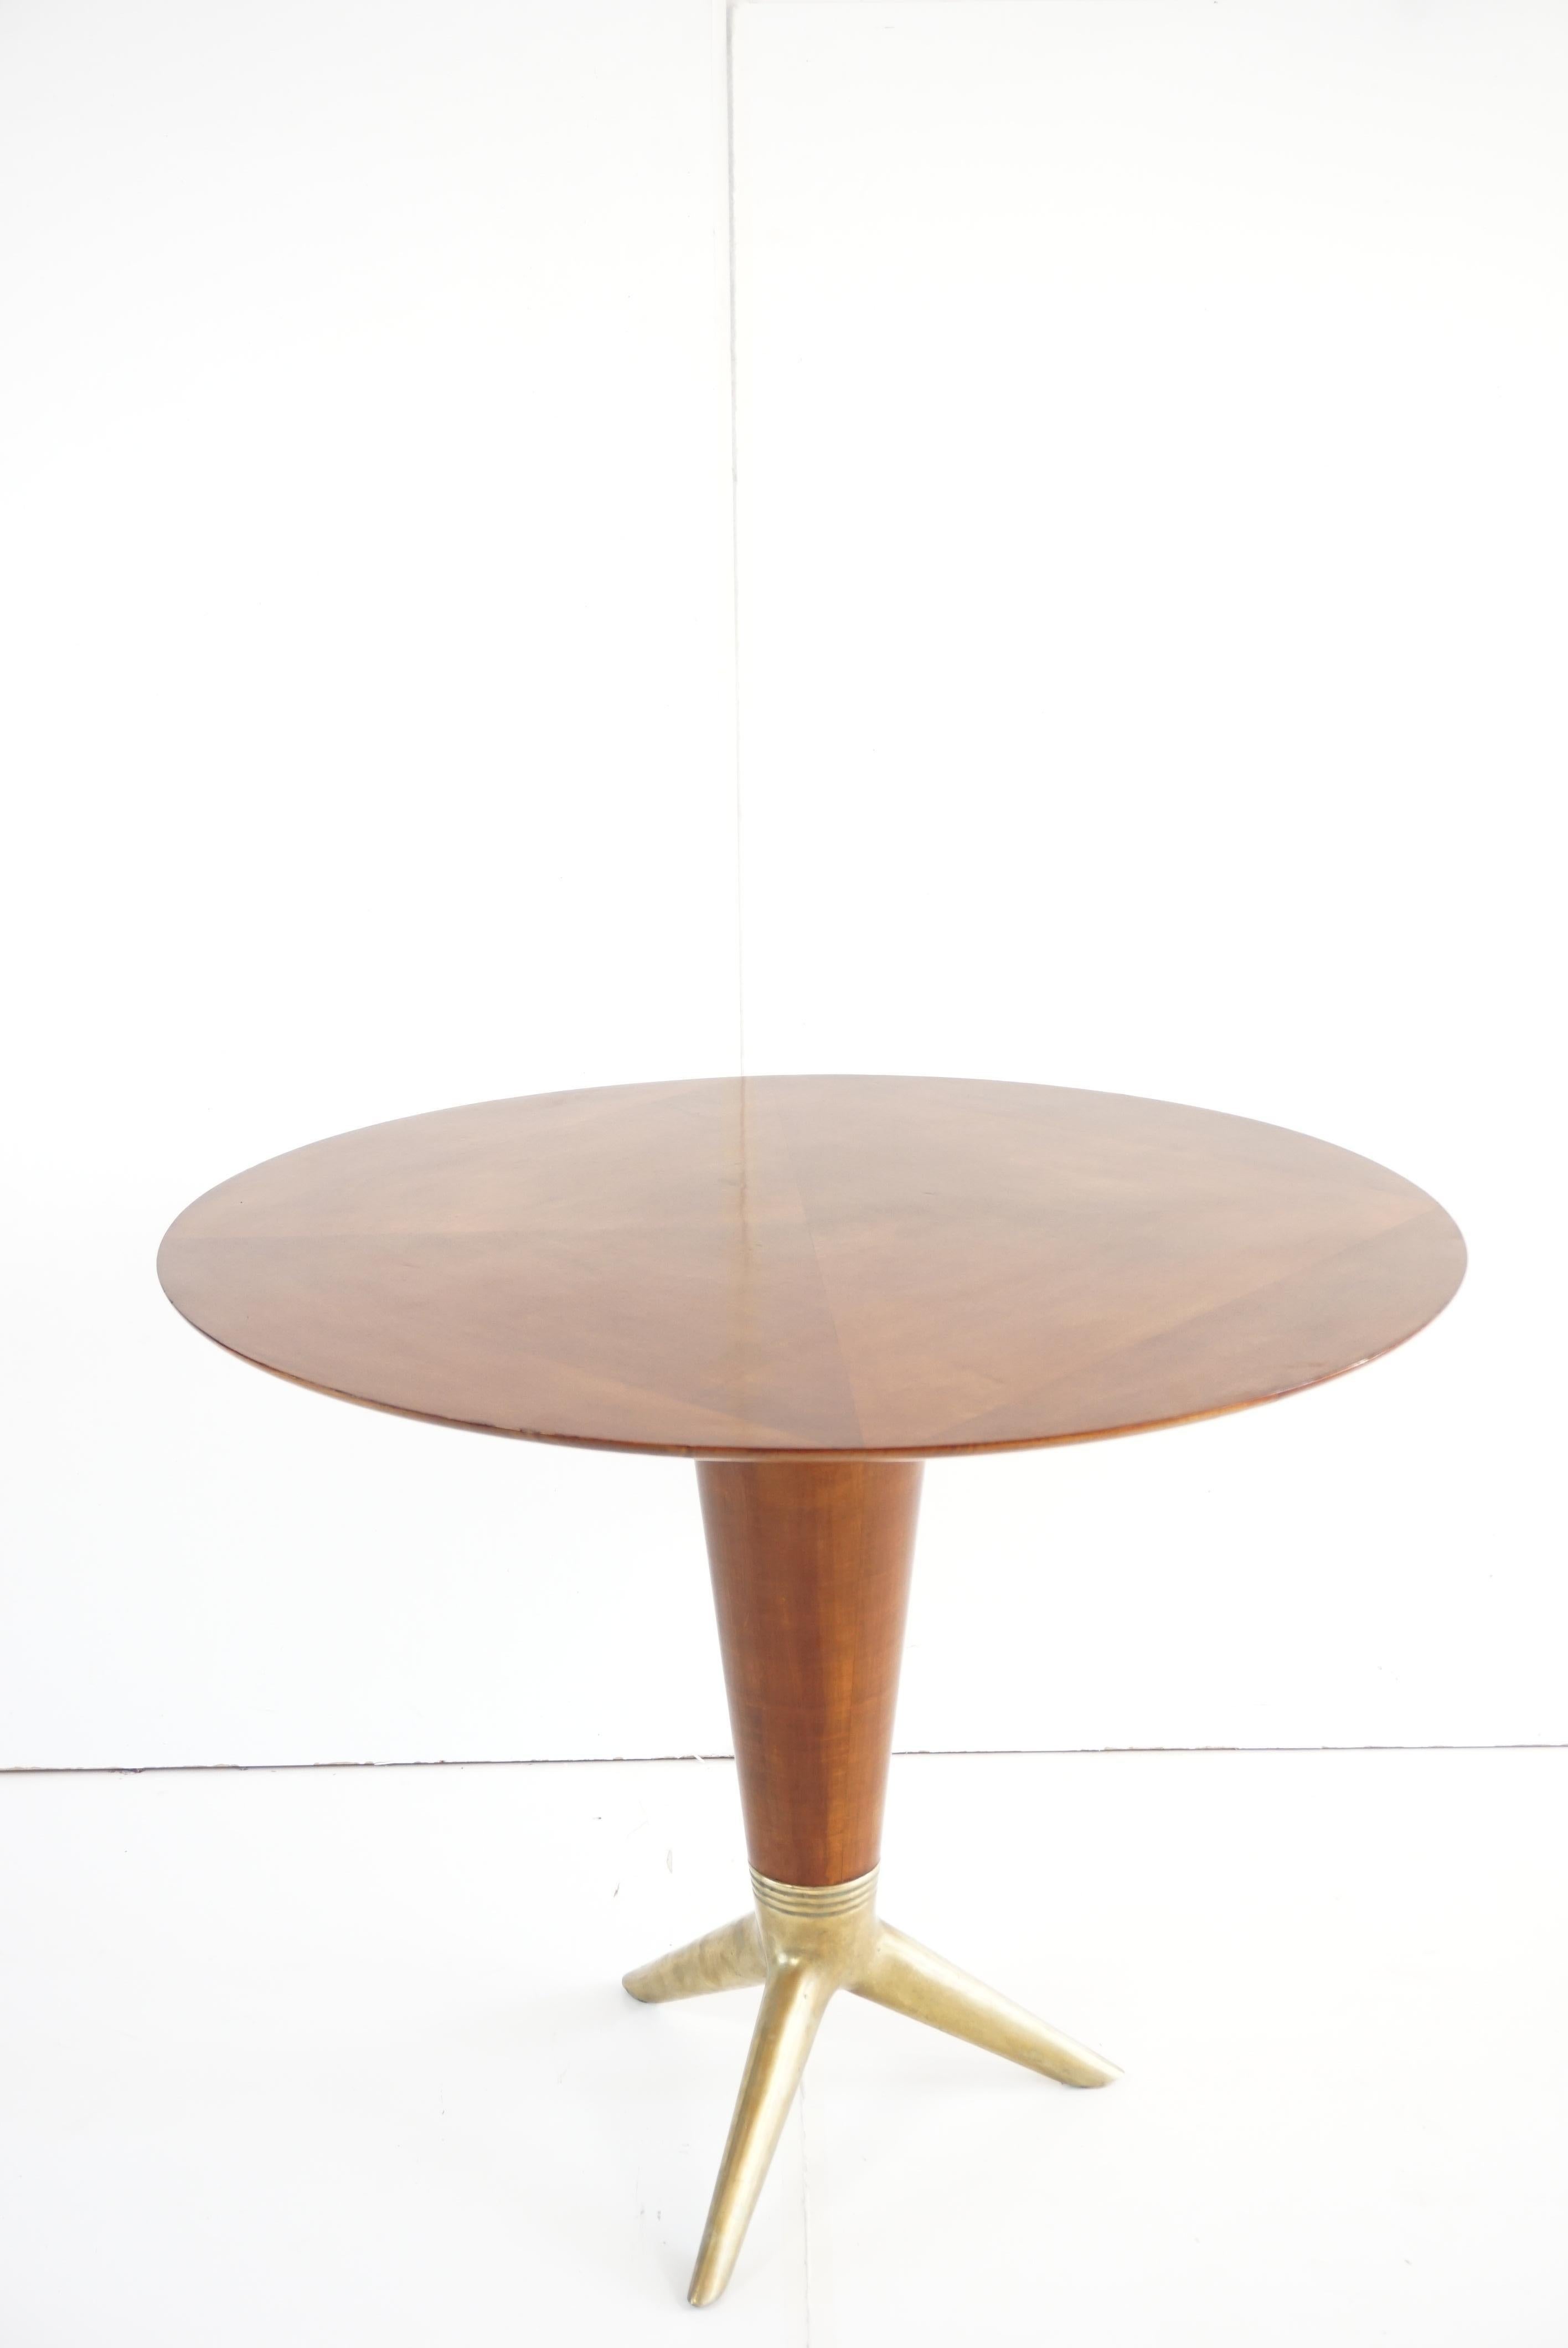 Italian Rare Maple and Brass Round Center Table by I.S.A. Bergamo 1950 For Sale